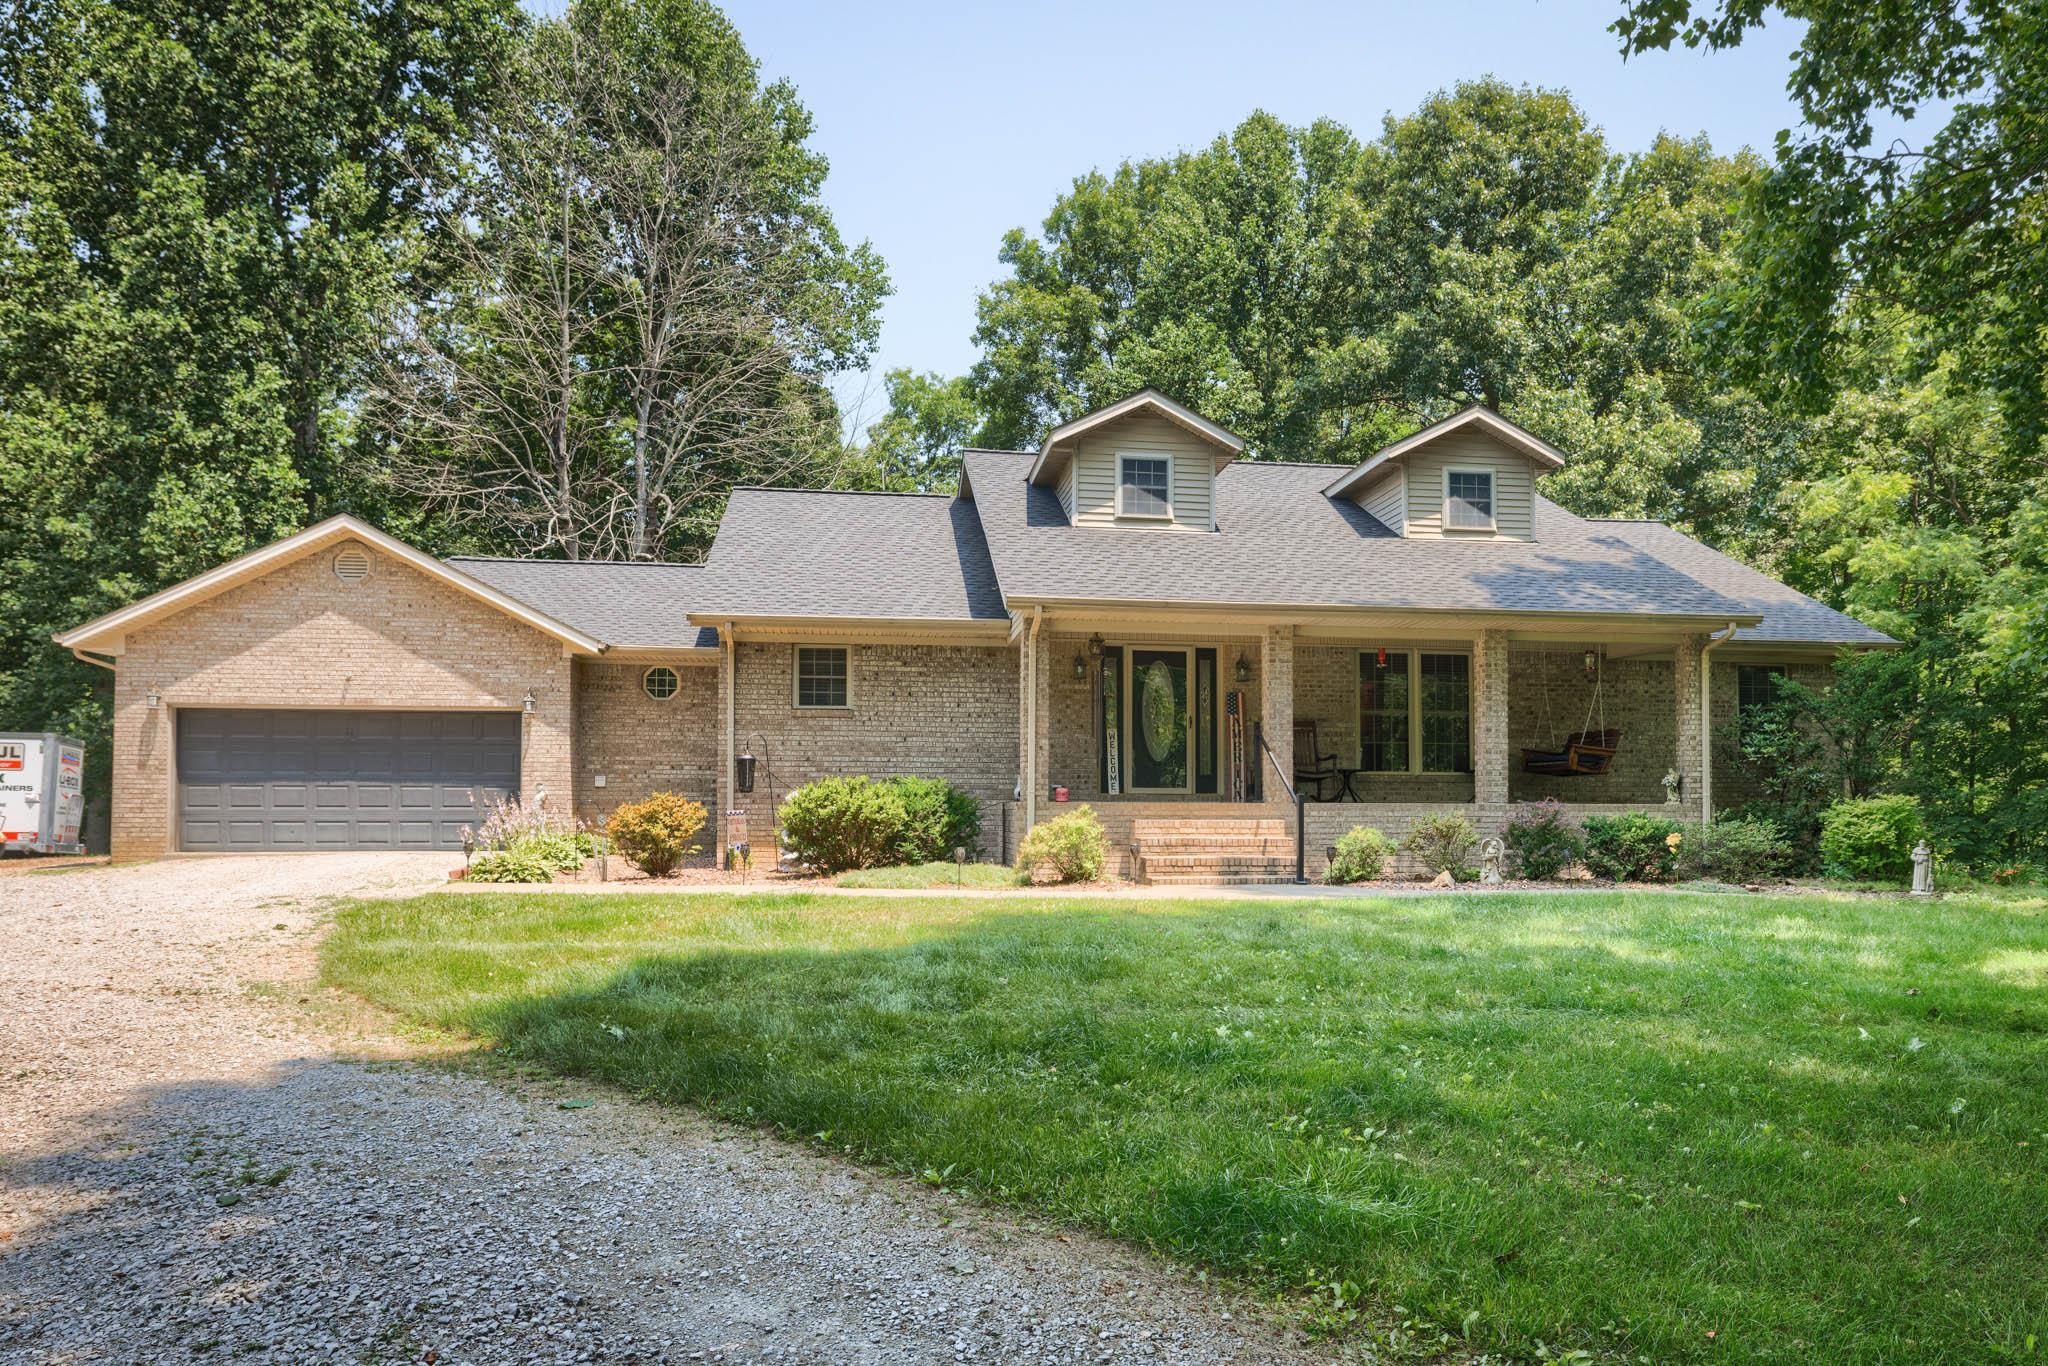 135 Roby Road, Reynolds Station, Kentucky 42368, 3 Bedrooms Bedrooms, ,3 BathroomsBathrooms,Farm,For Sale,Roby Road,88580